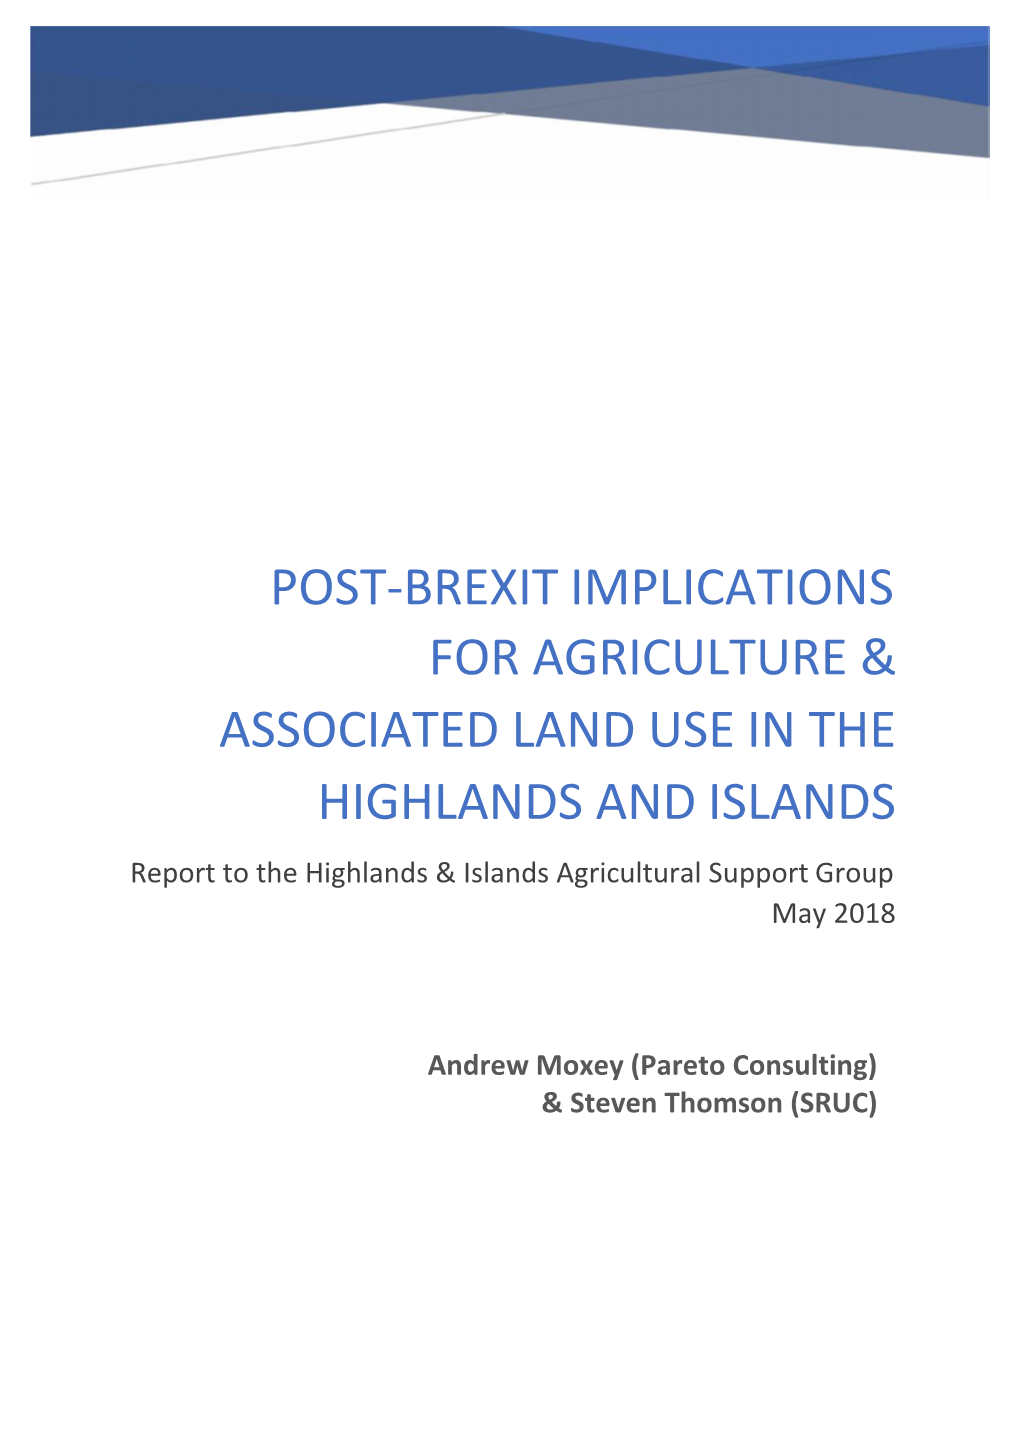 Post-Brexit Implications for Agriculture & Associated Land Use in The